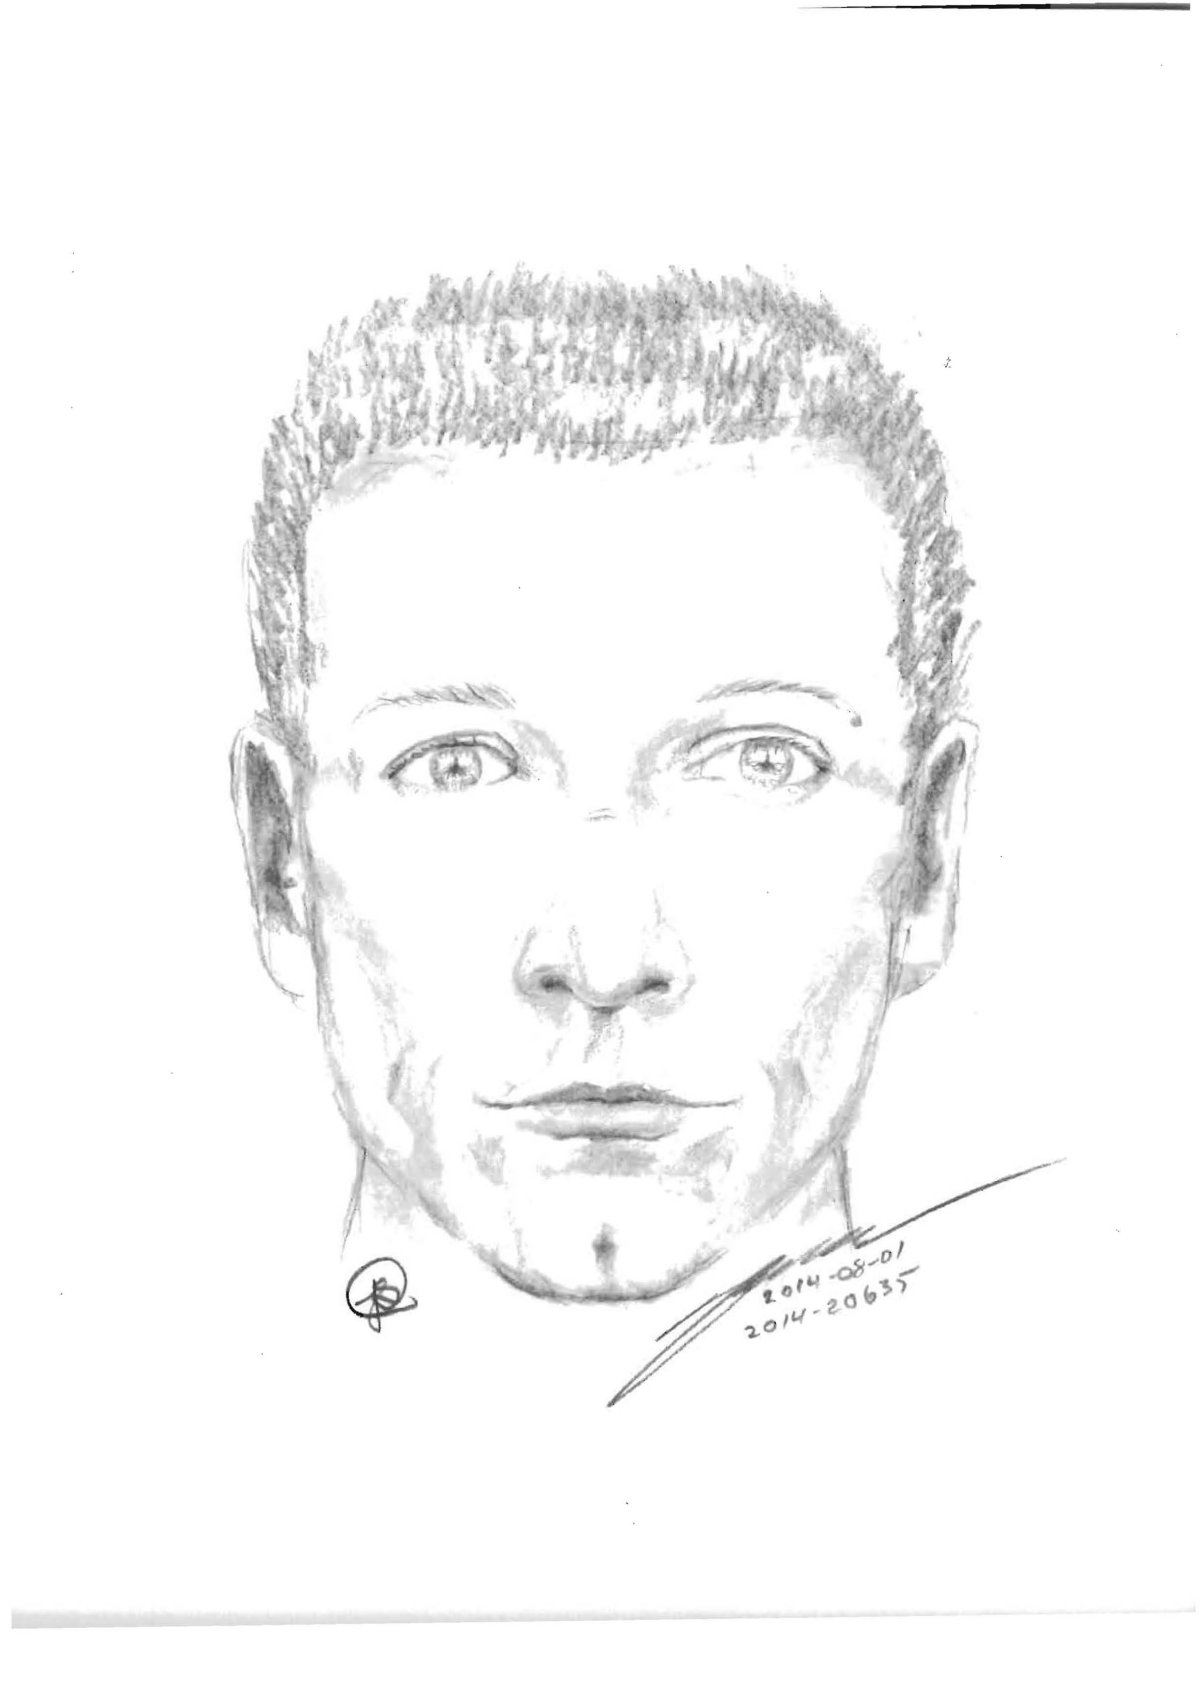 Sketch of a man wanted in connection to an attempted abduction.